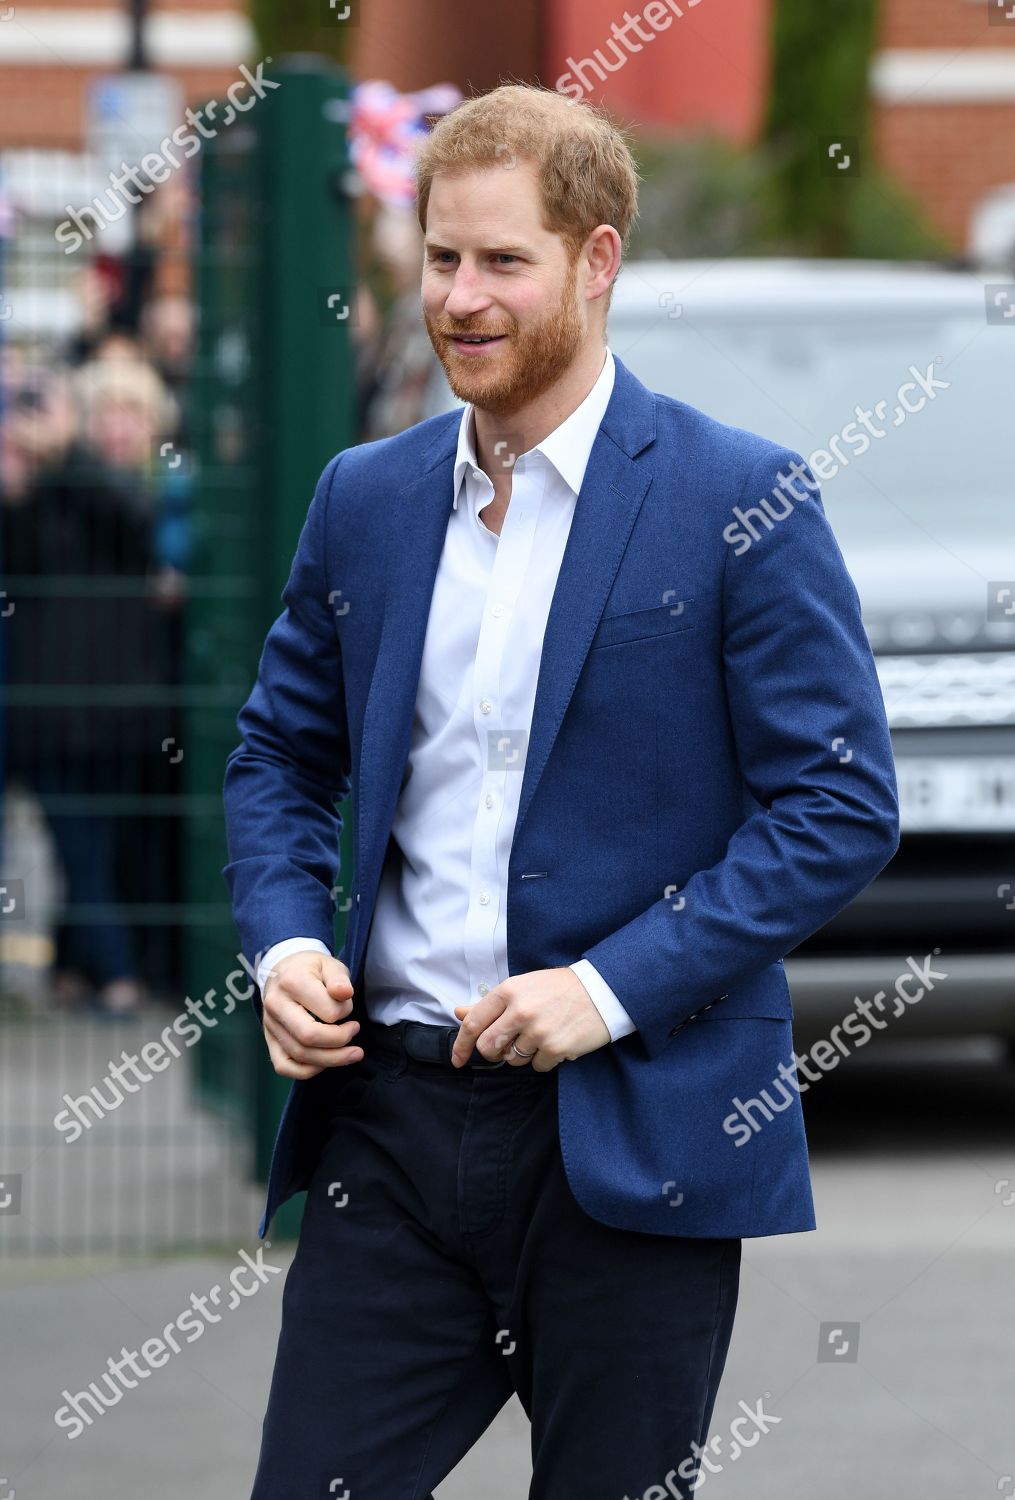 prince-harry-visits-st-vincents-catholic-primary-school-for-commonwealth-canopy-and-woodland-trust-tree-planting-ceremony-london-uk-shutterstock-editorial-10160984f.jpg